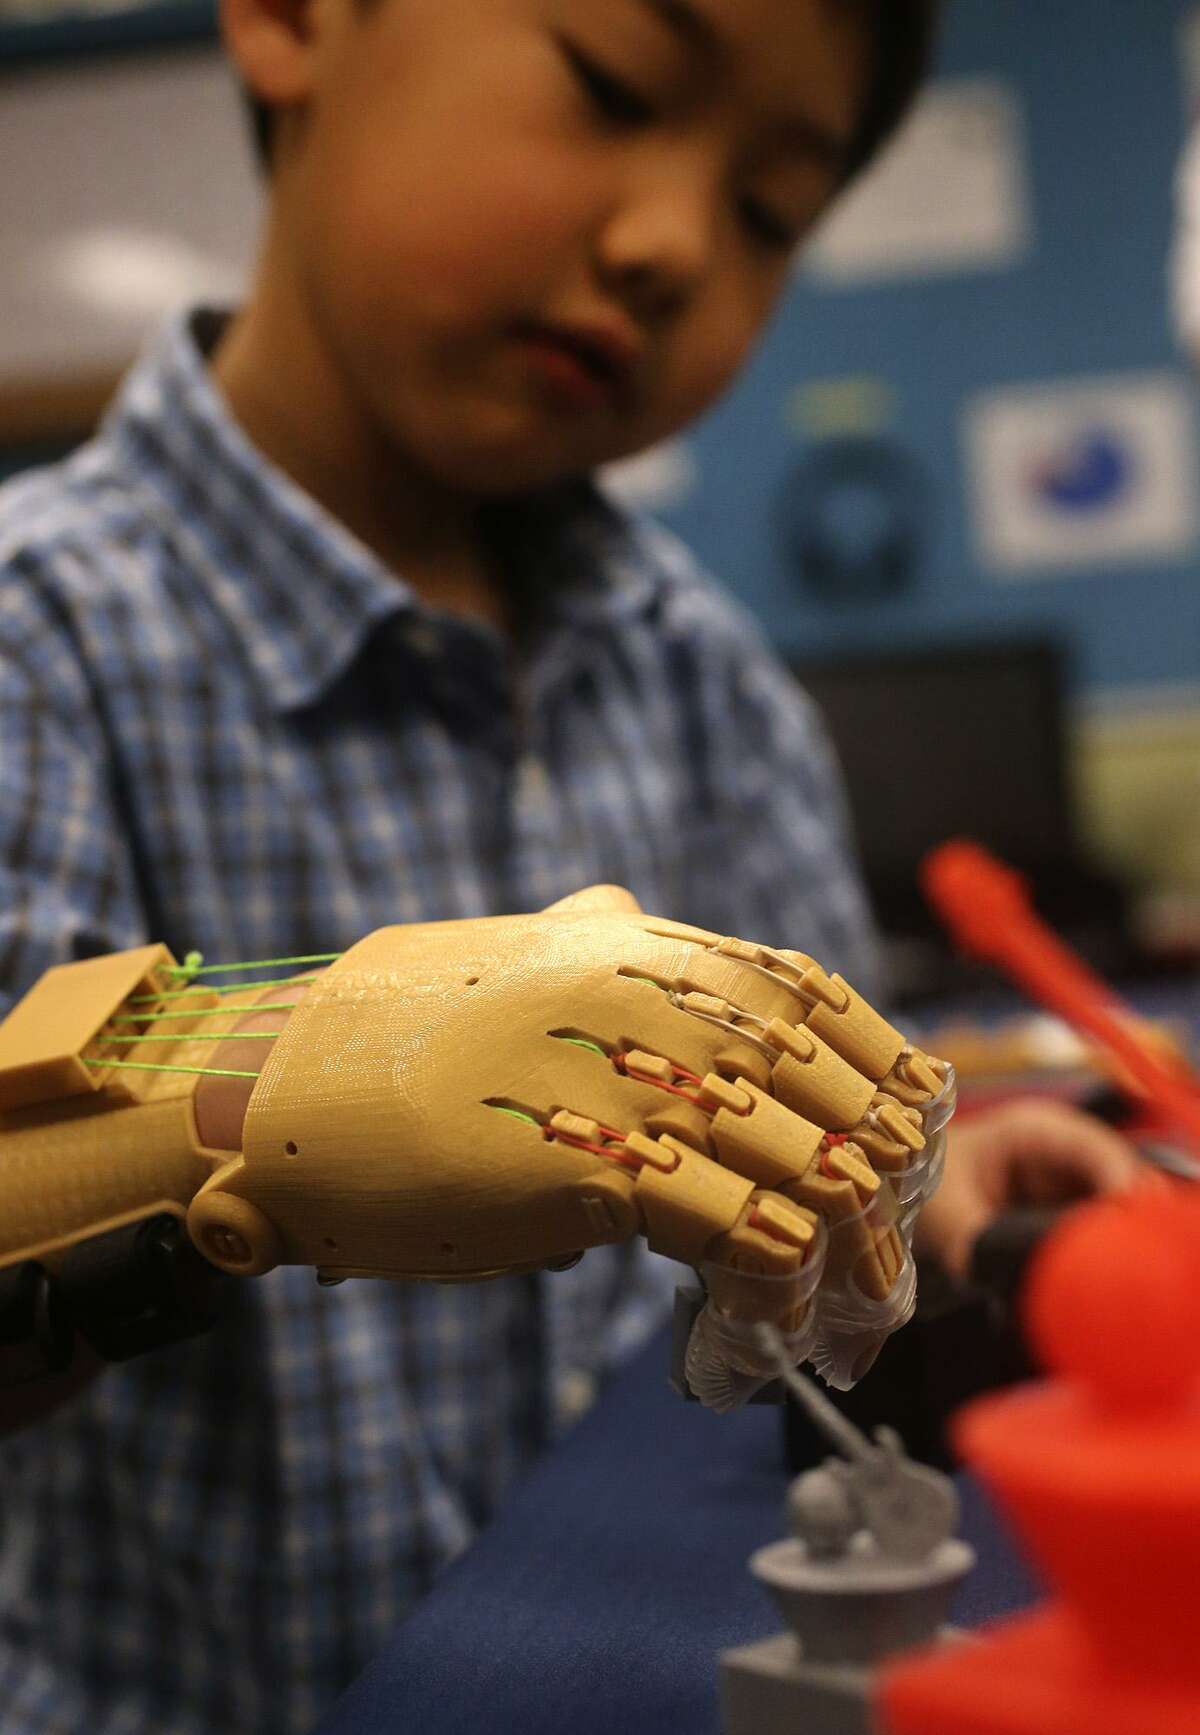 Zack Robbins,6, uses a prosthetic hand Wednesday March 8, 2017 made with a 3D printer by School of Science and Technology student Justin Cantu,16. Robbins was born with underdeveloped right hand and Cantu used technology created by an on-line community called e-NABLE to make the hand for Robbins.